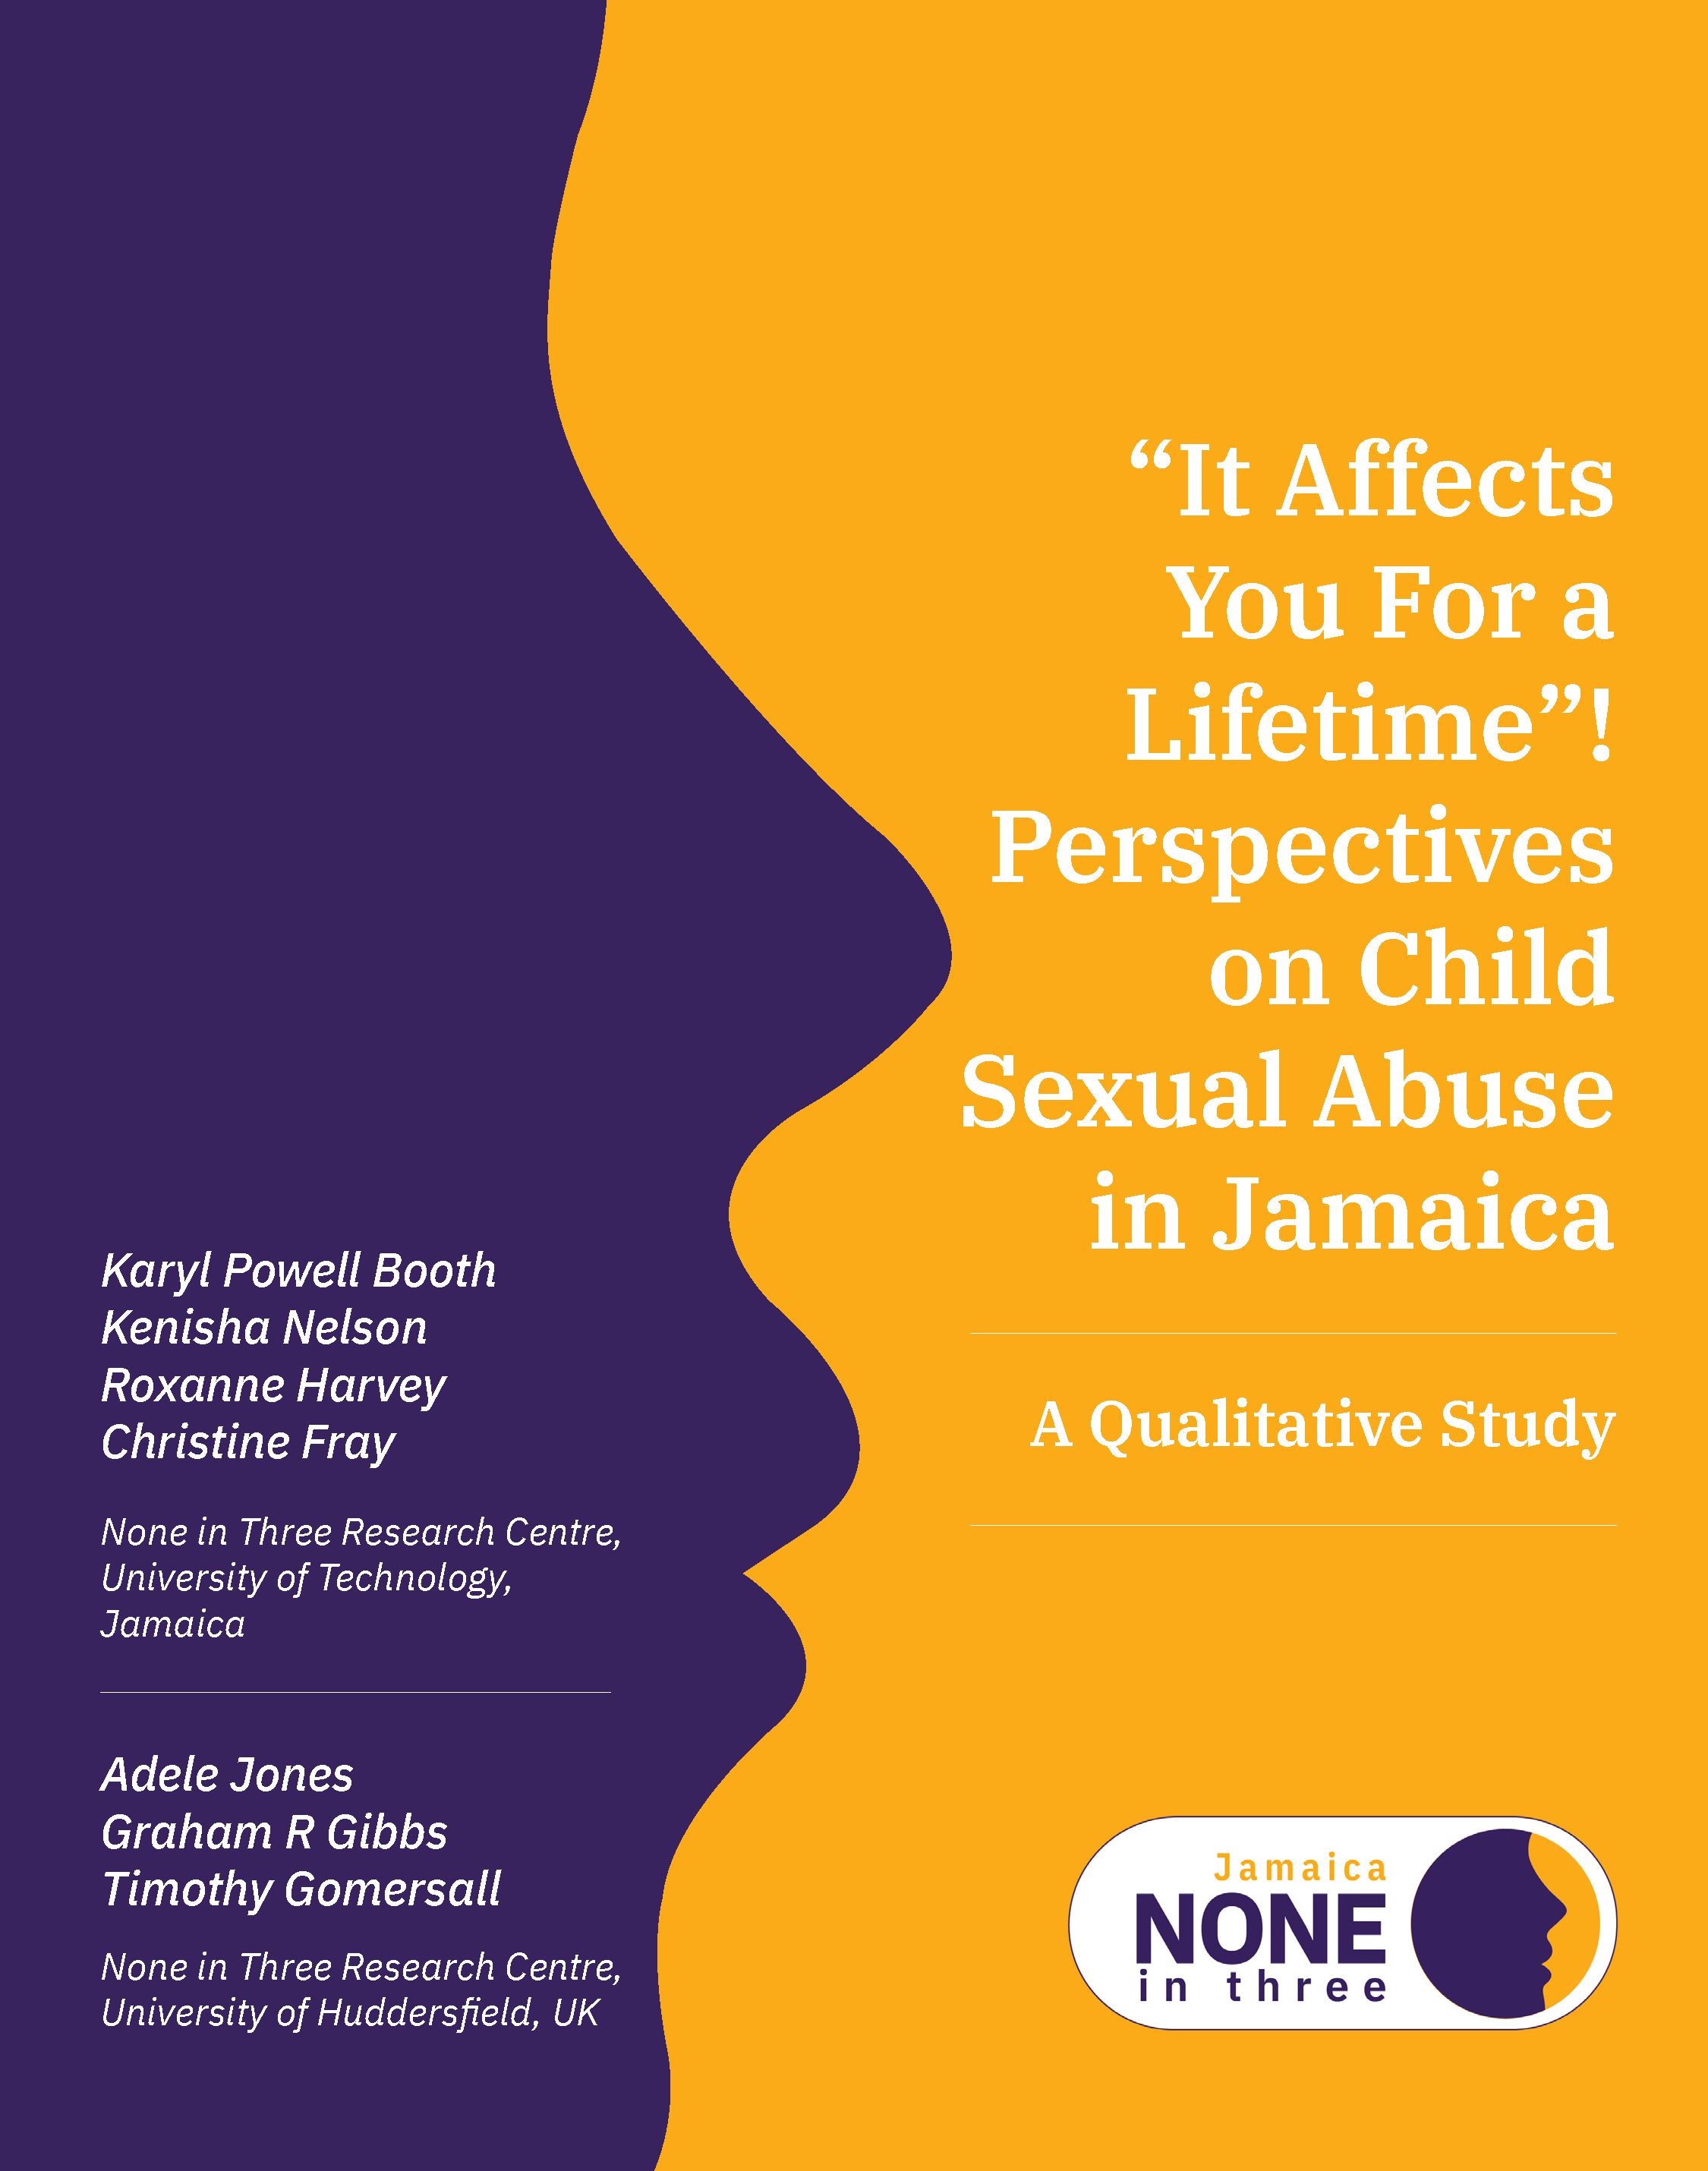 Front cover of qualitative research report into child sexual abuse in Jamaica